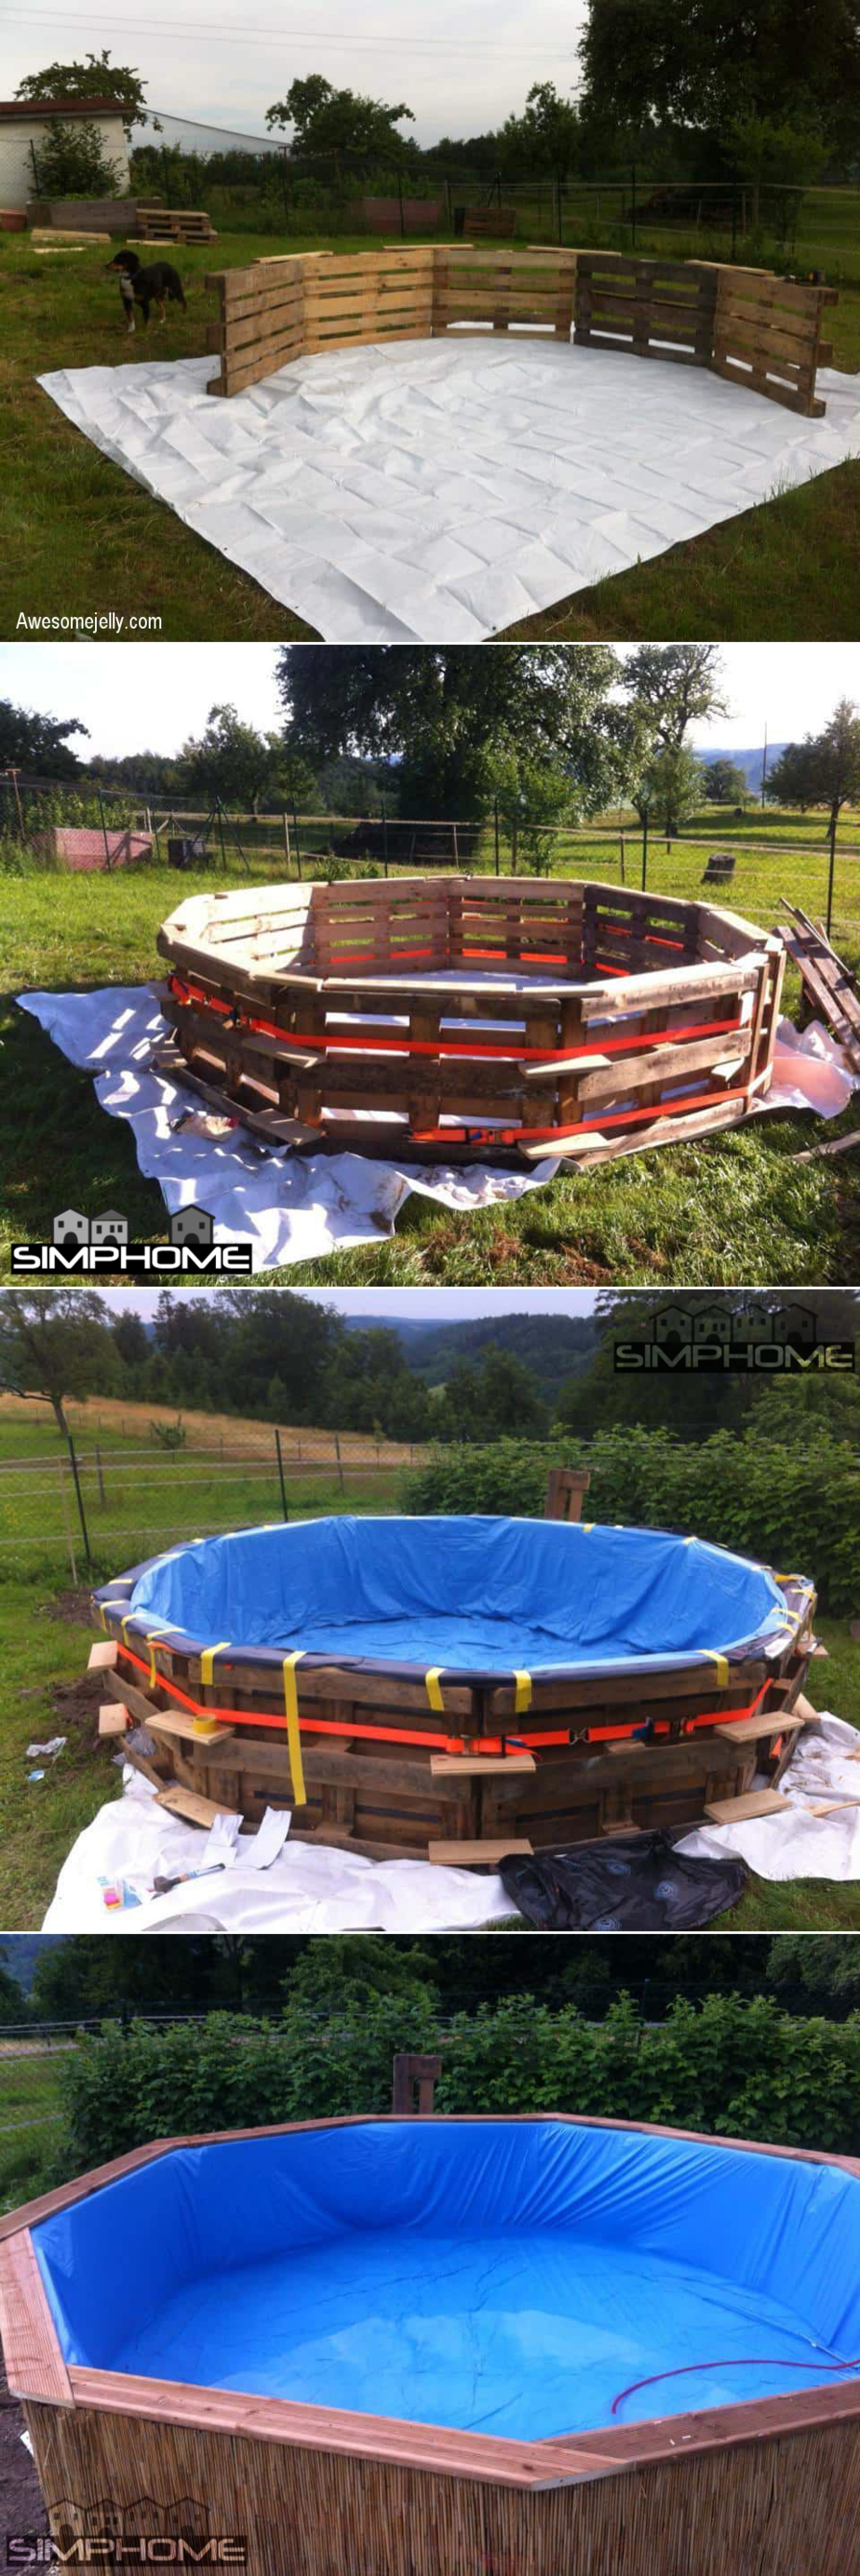 4.DIY Above Ground Pool from Wood Pallet via Simphome.com